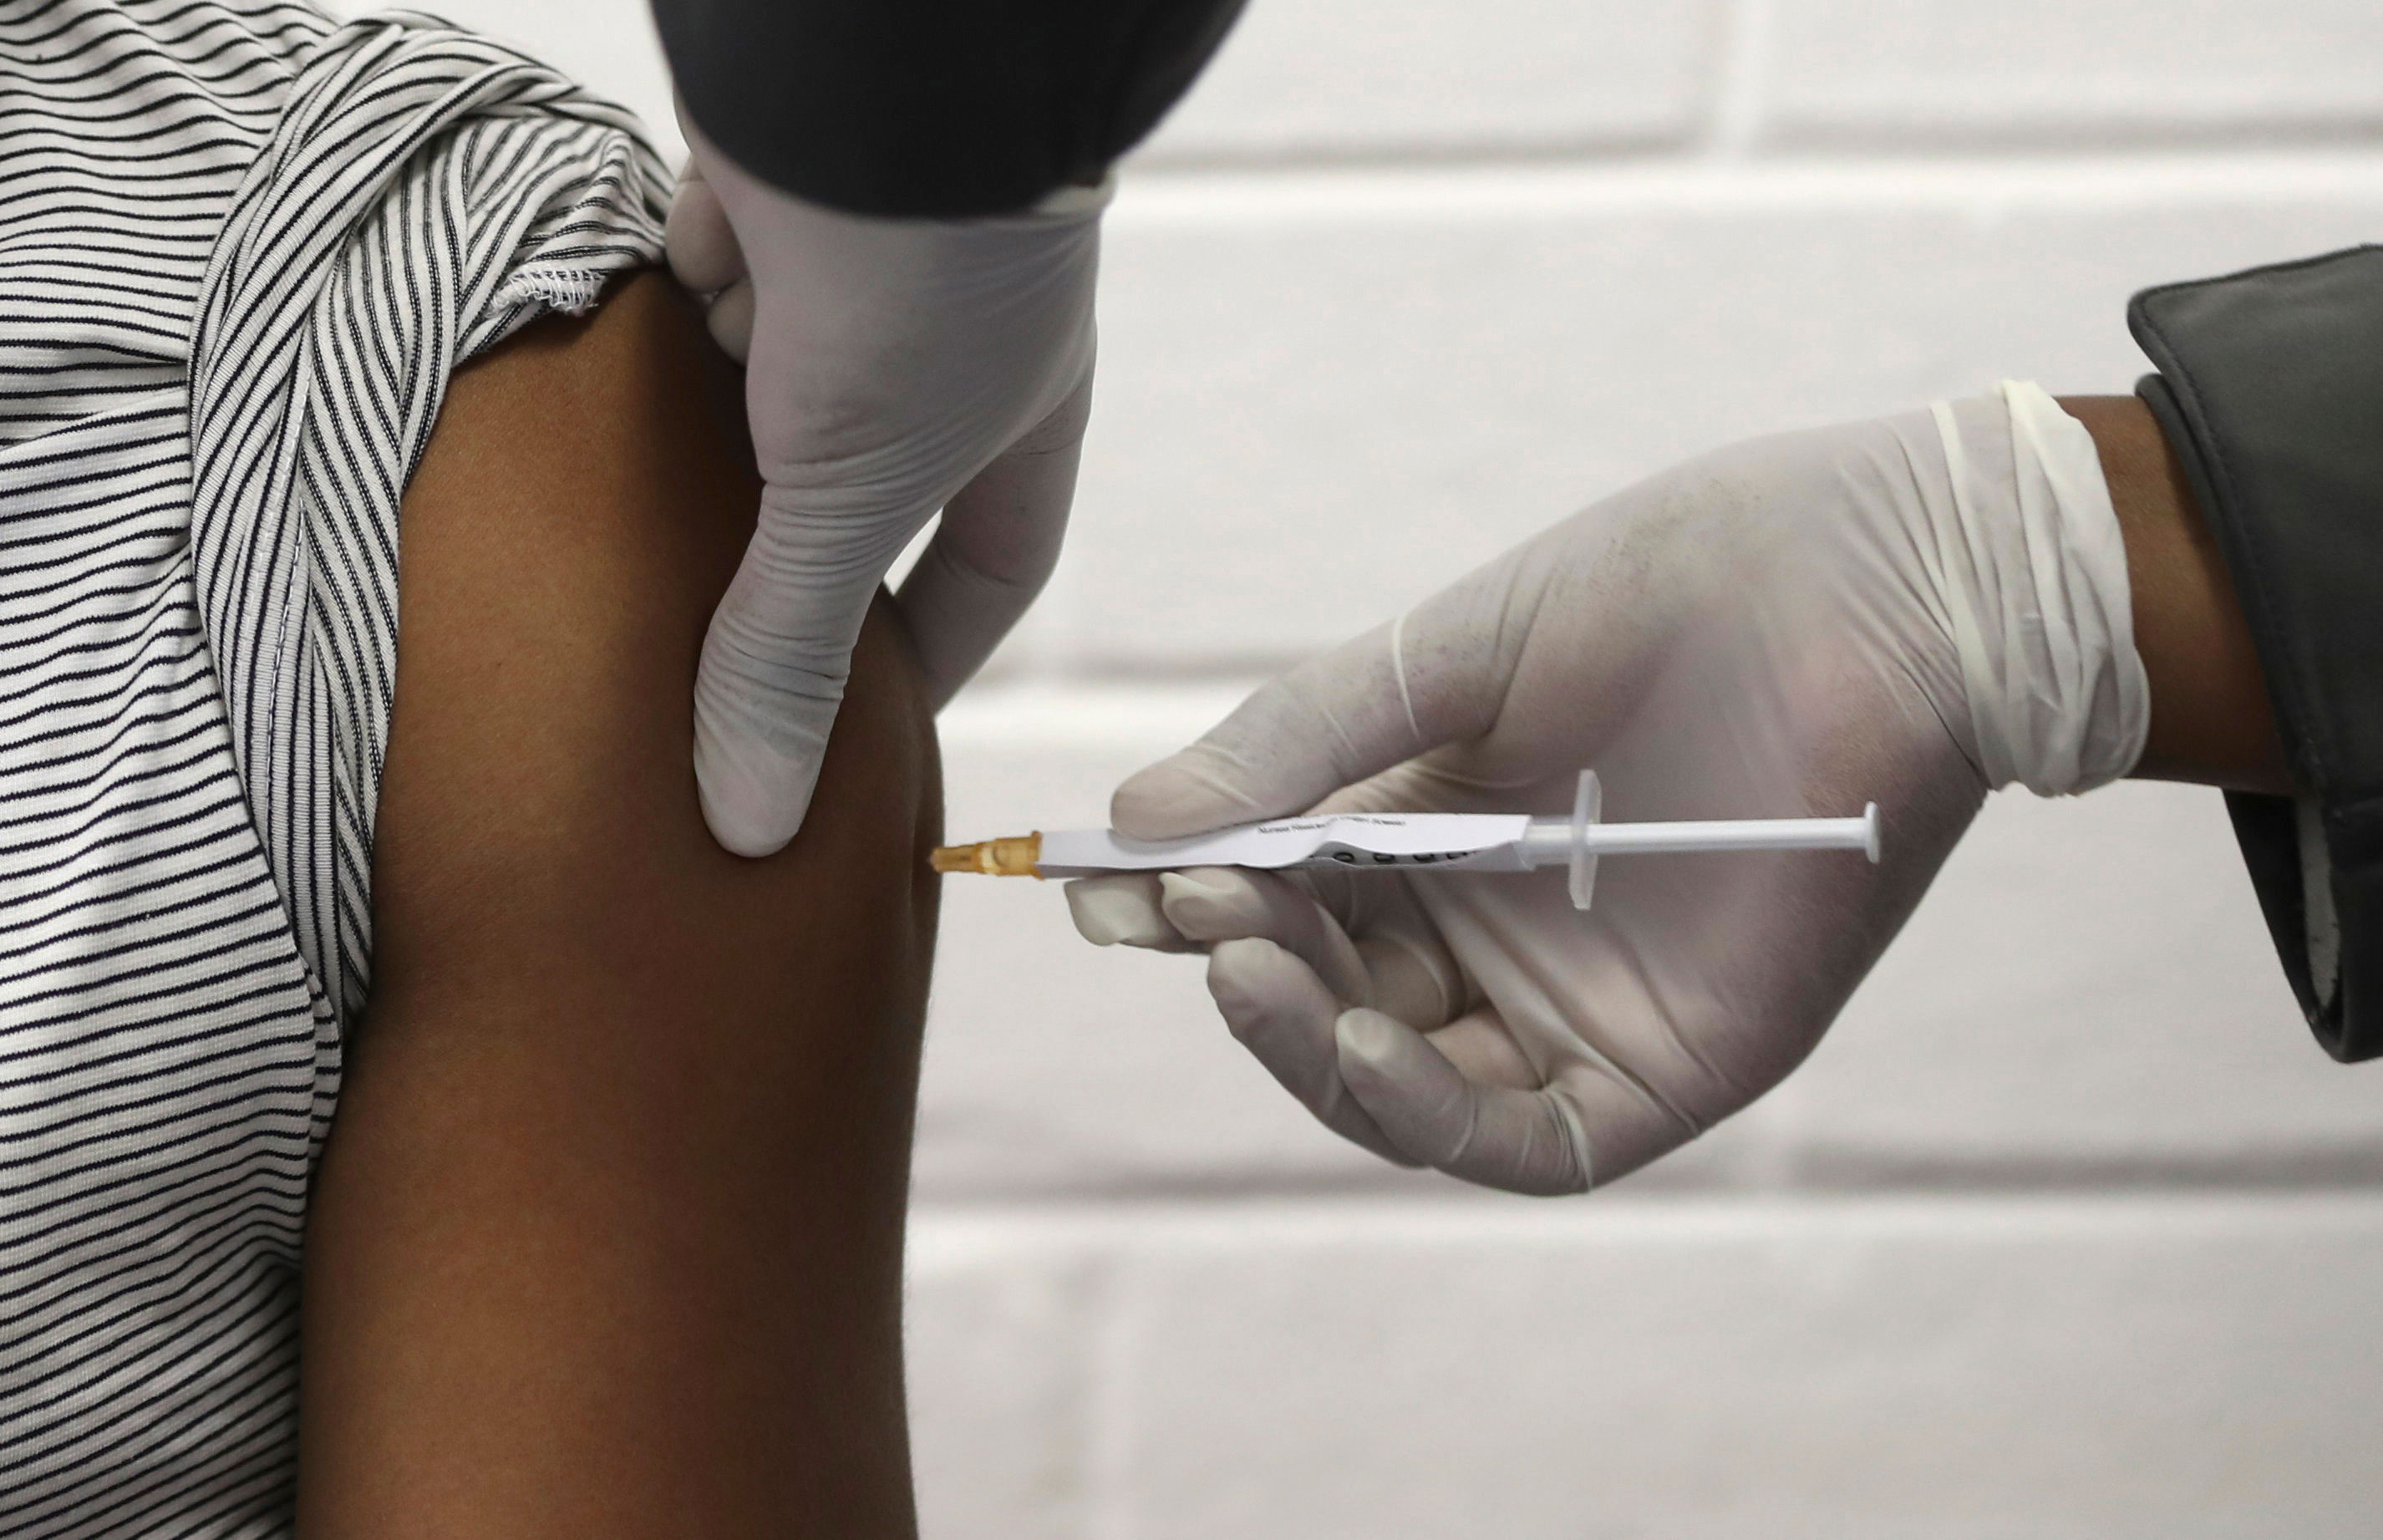 A volunteer receives an injection on June 24 at a hospital in Soweto, South Africa, as part of a Covid-19 vaccine trial developed by the University of Oxford and AstraZeneca.